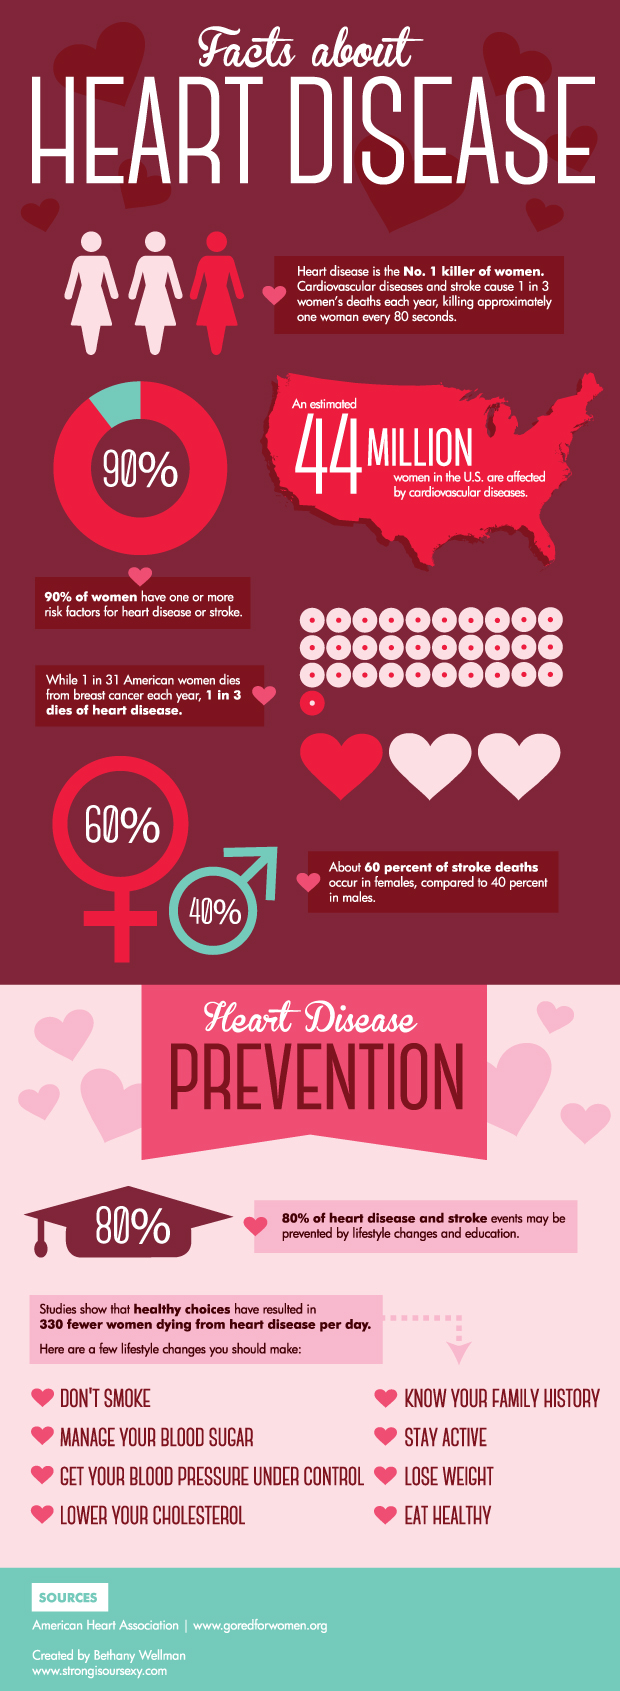 heart health facts and heart disease prevention tips